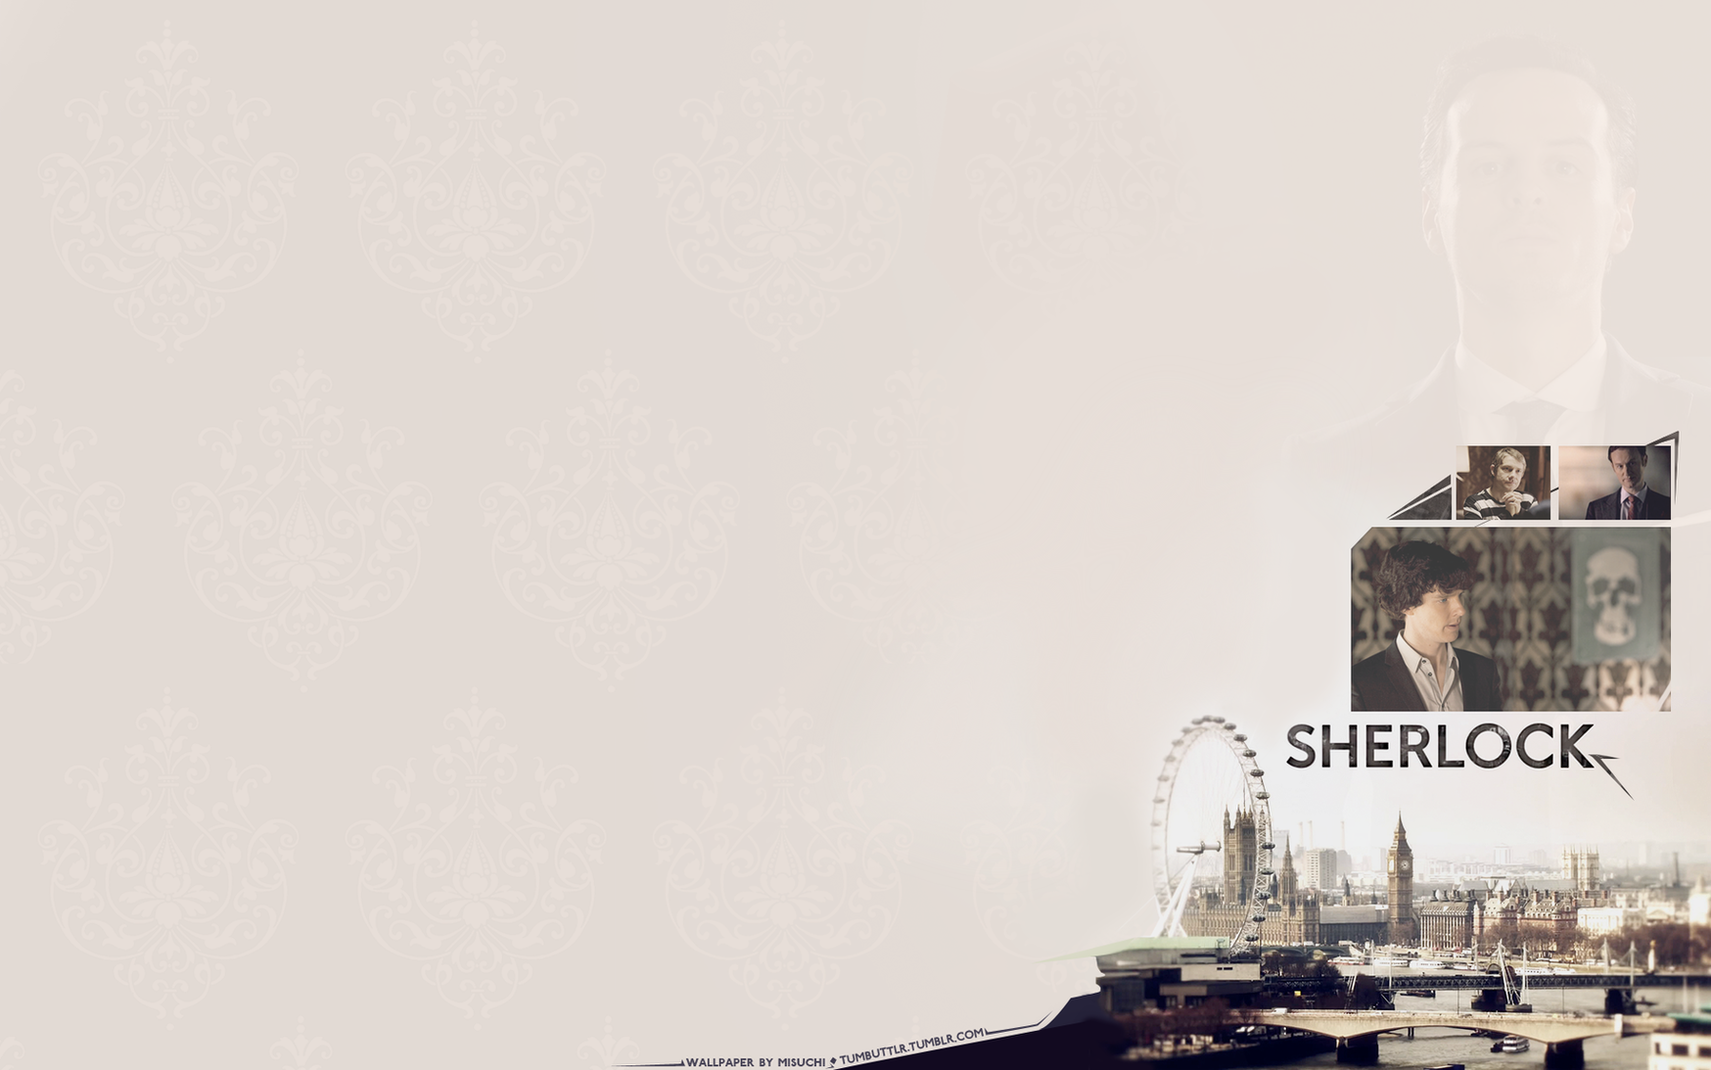 Widening Gyreations - I wanted a classy Sherlock wallpaper for my...